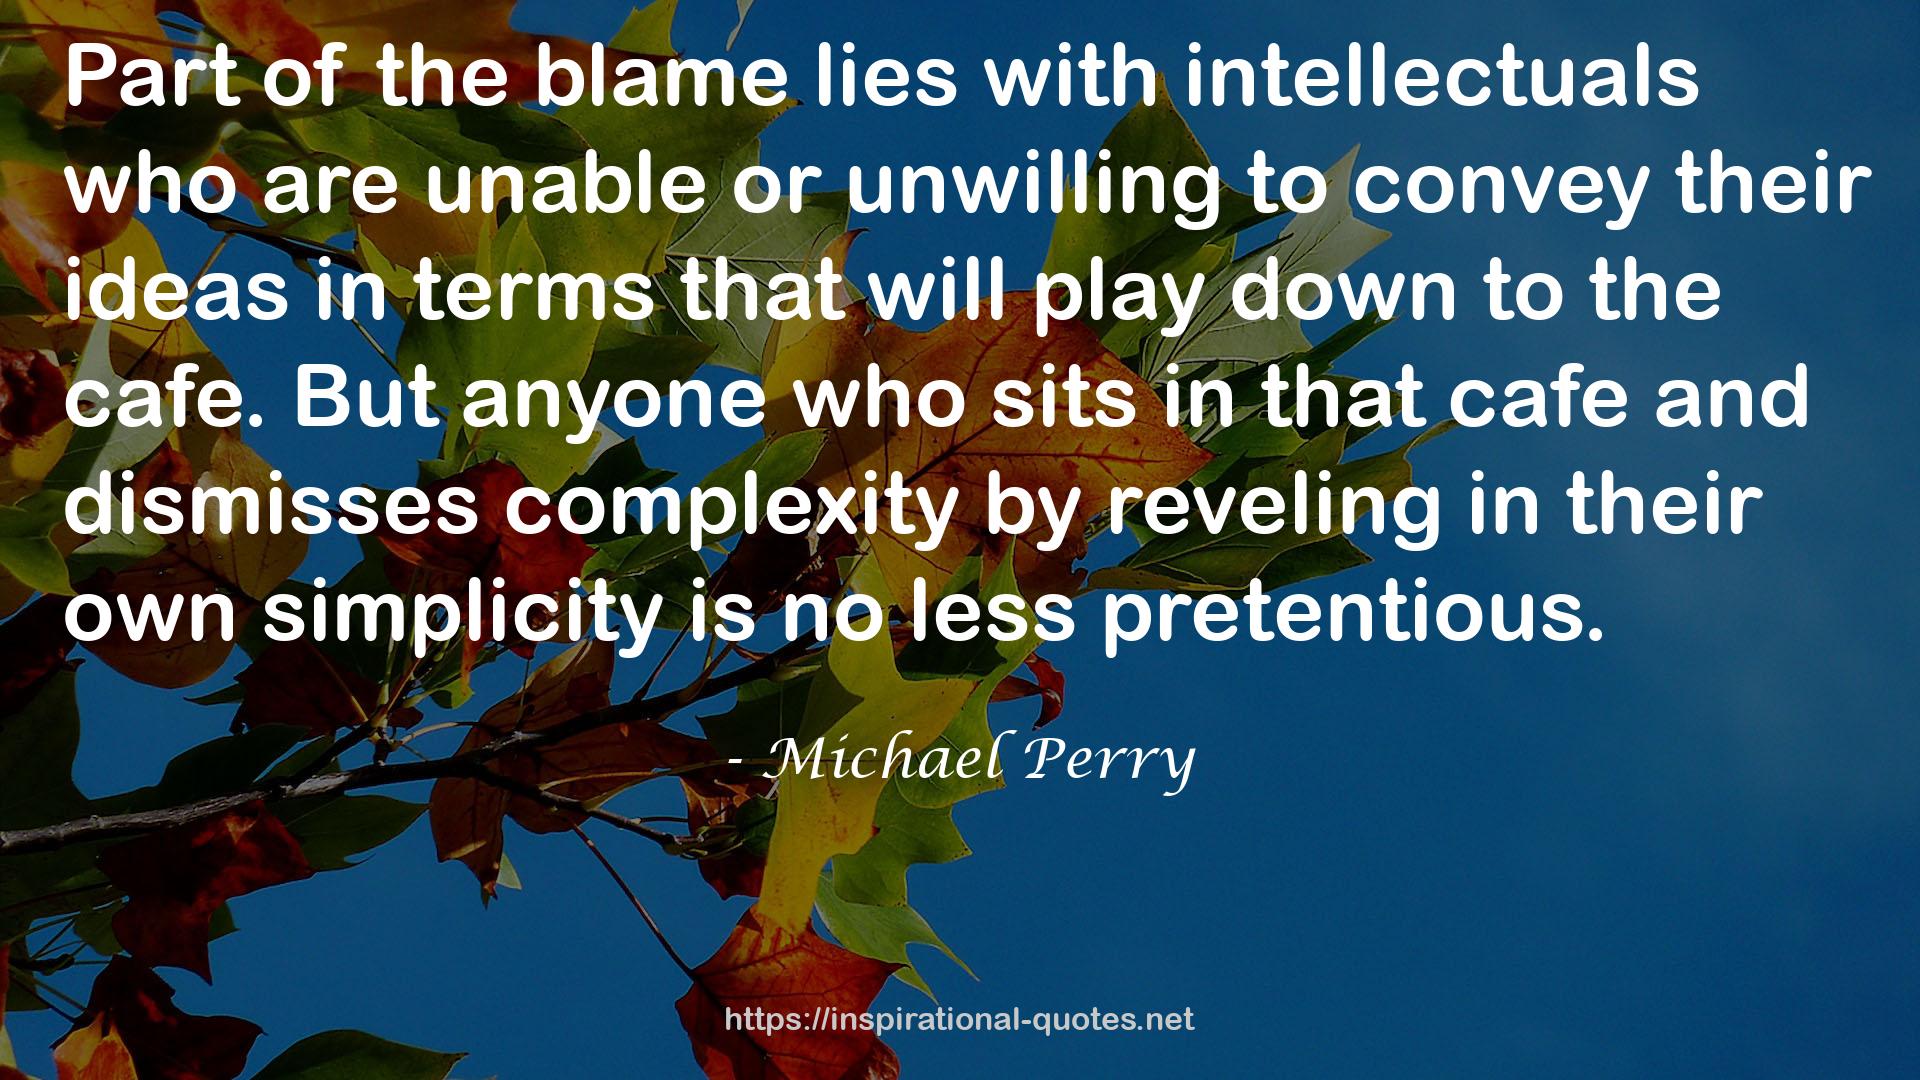 Michael Perry QUOTES